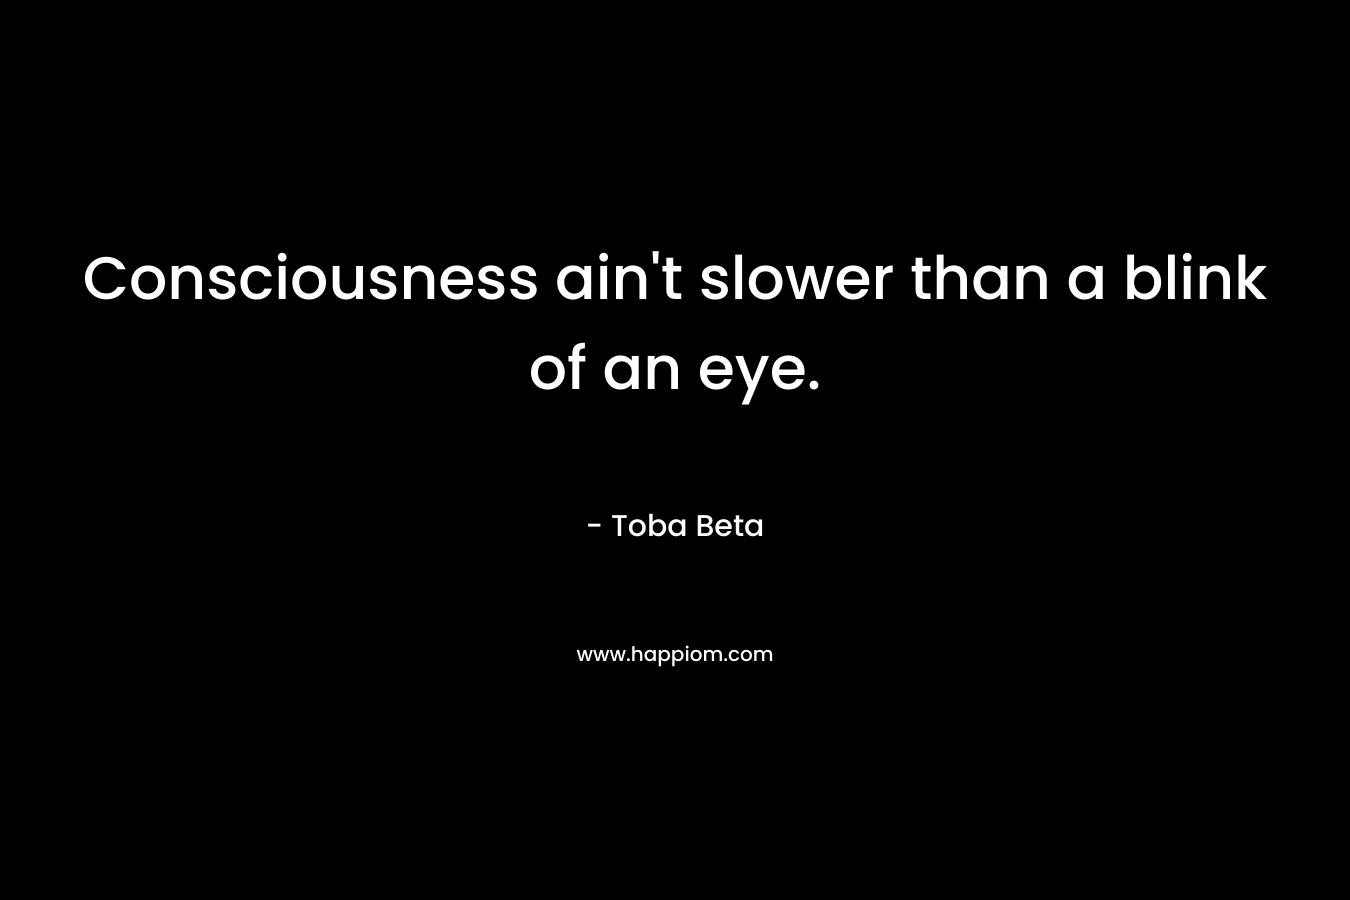 Consciousness ain’t slower than a blink of an eye. – Toba Beta